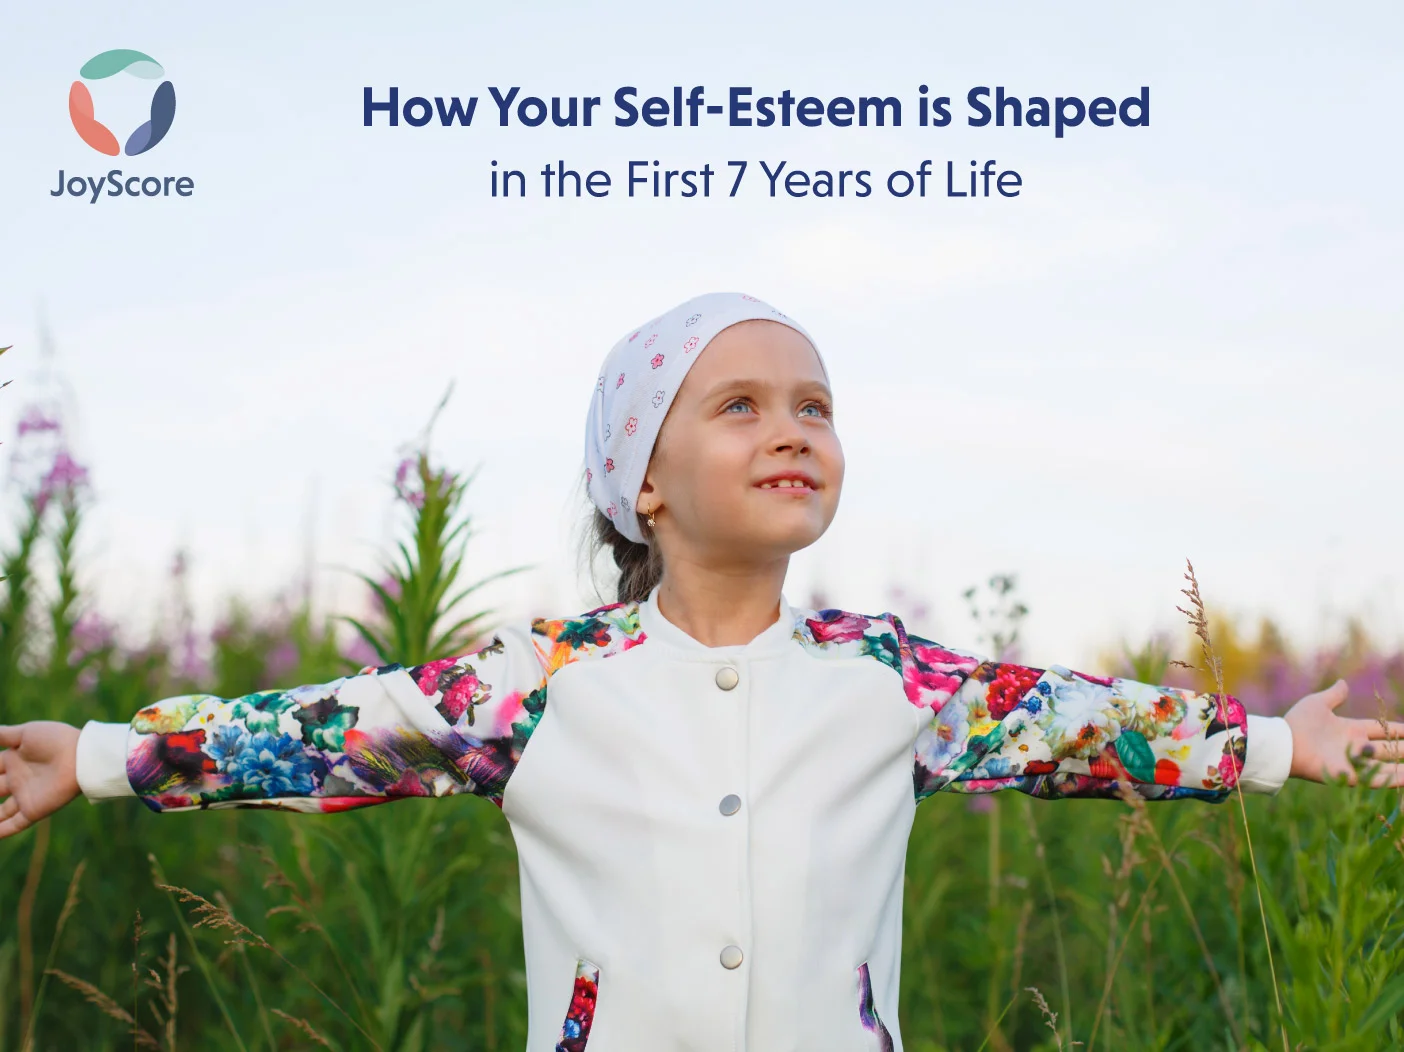 How Your Self-Esteem is Shaped in the First 7 Years of Life